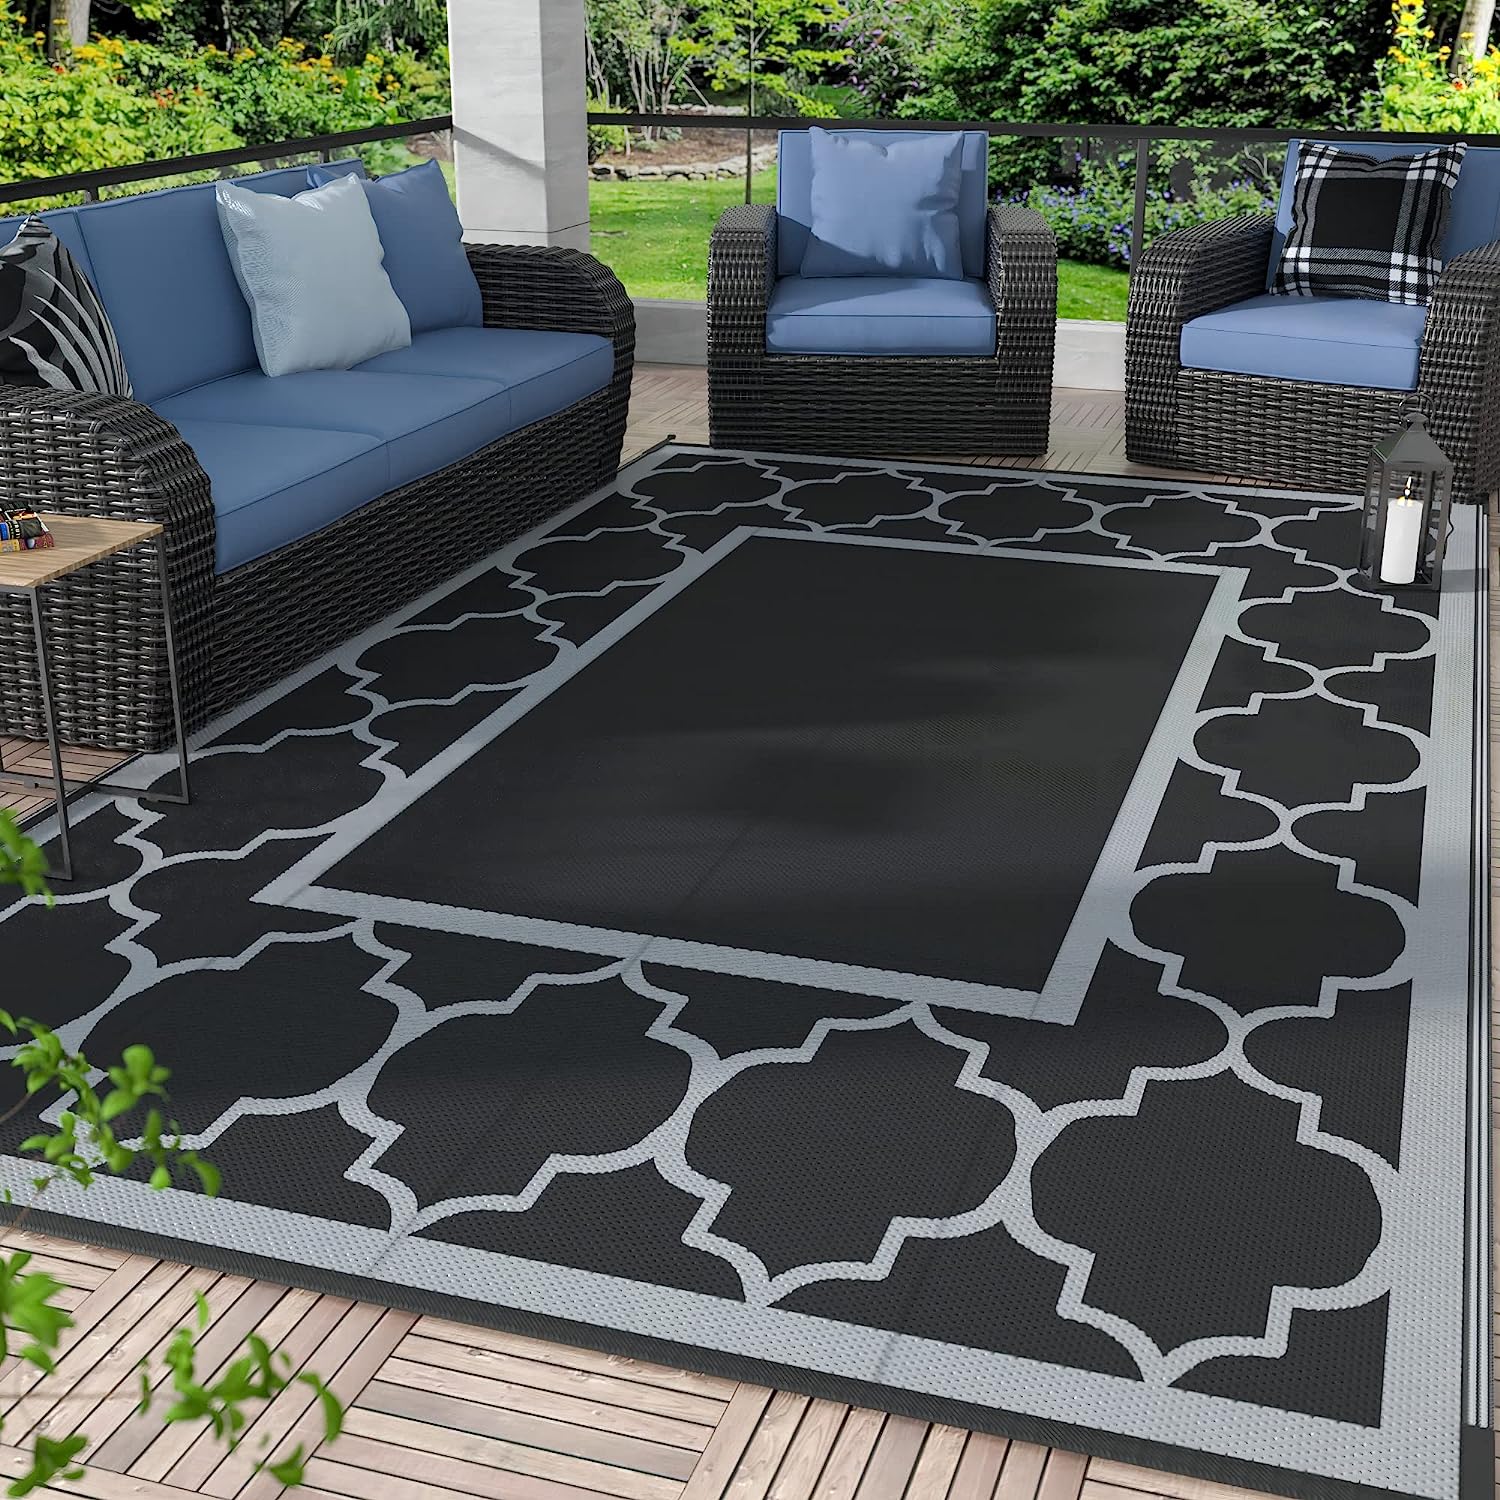 GENIMO 6'x9' Outdoor Rug for Patio,Reversible Plastic [...]